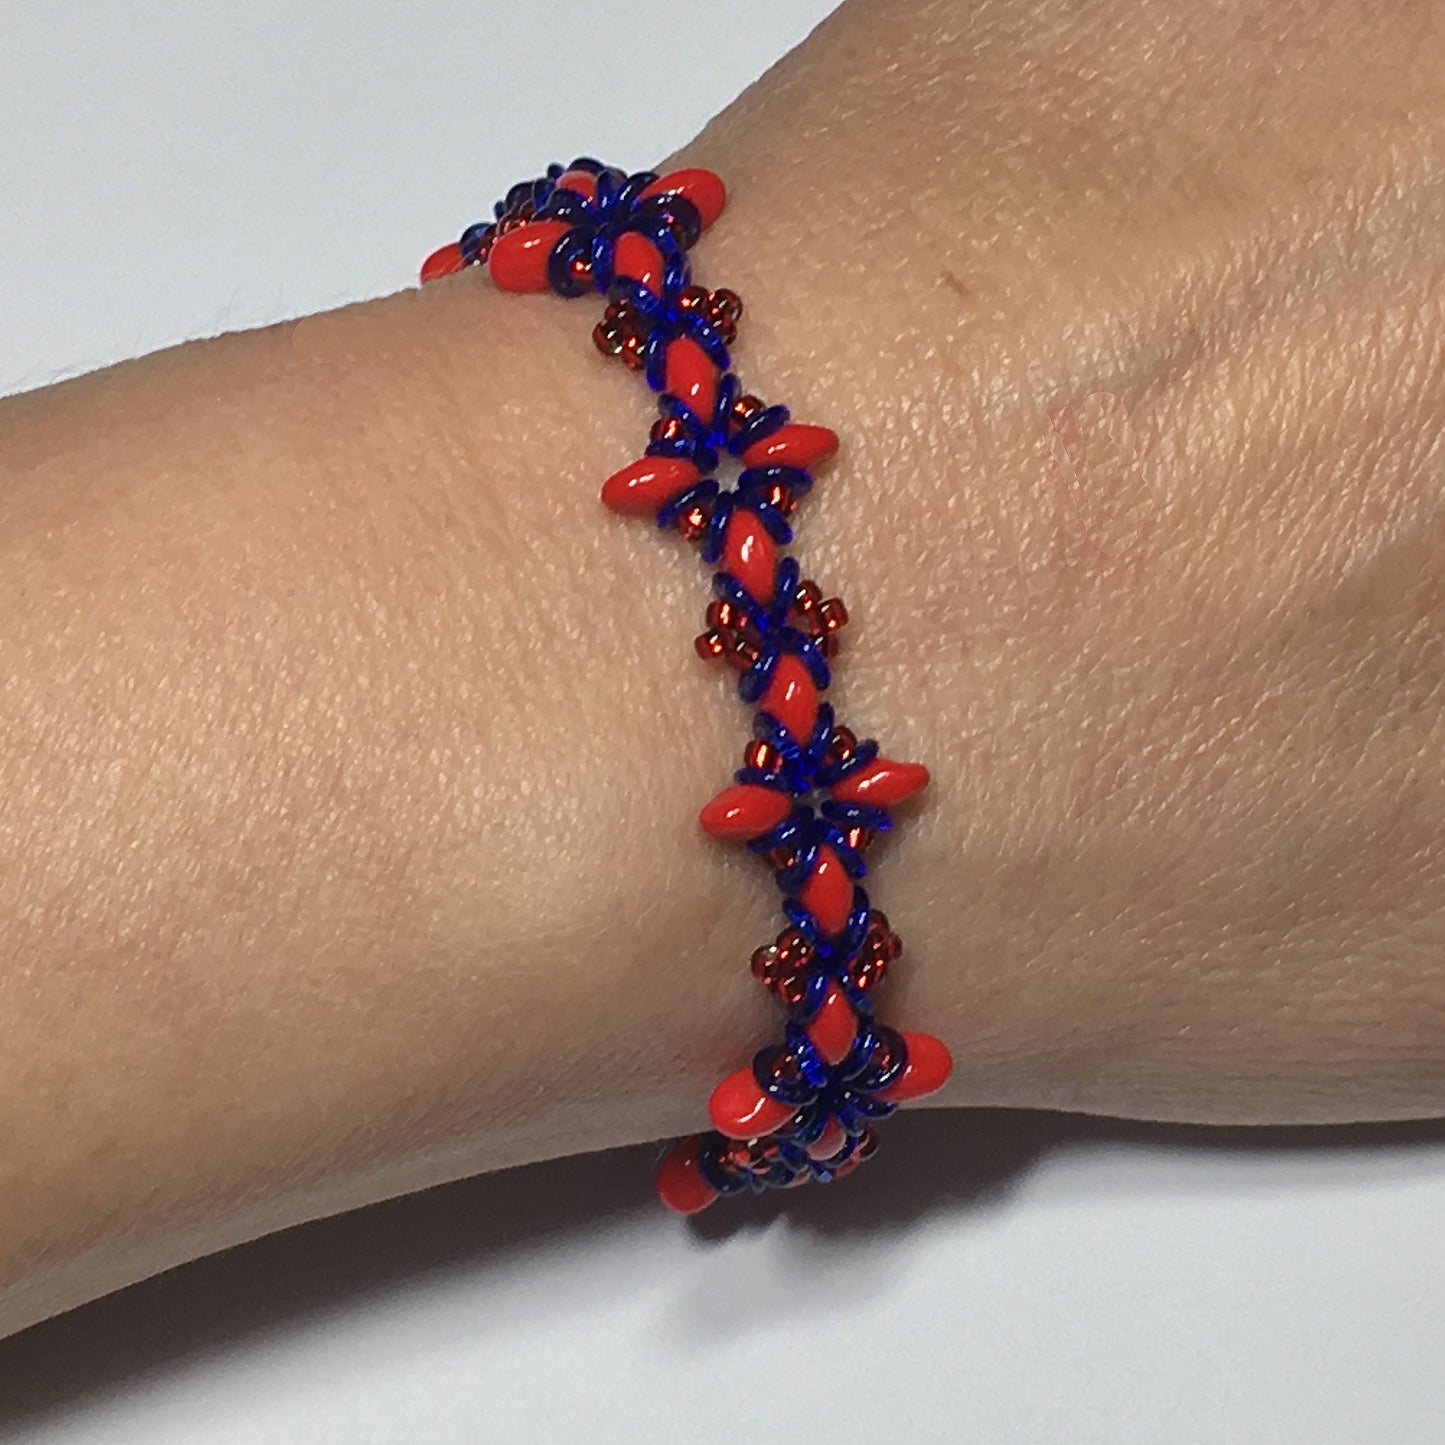 Bead Kit to Make "Oh, My Stars! Bracelet" Red / Blue with Free Tutorial starting at $9.99